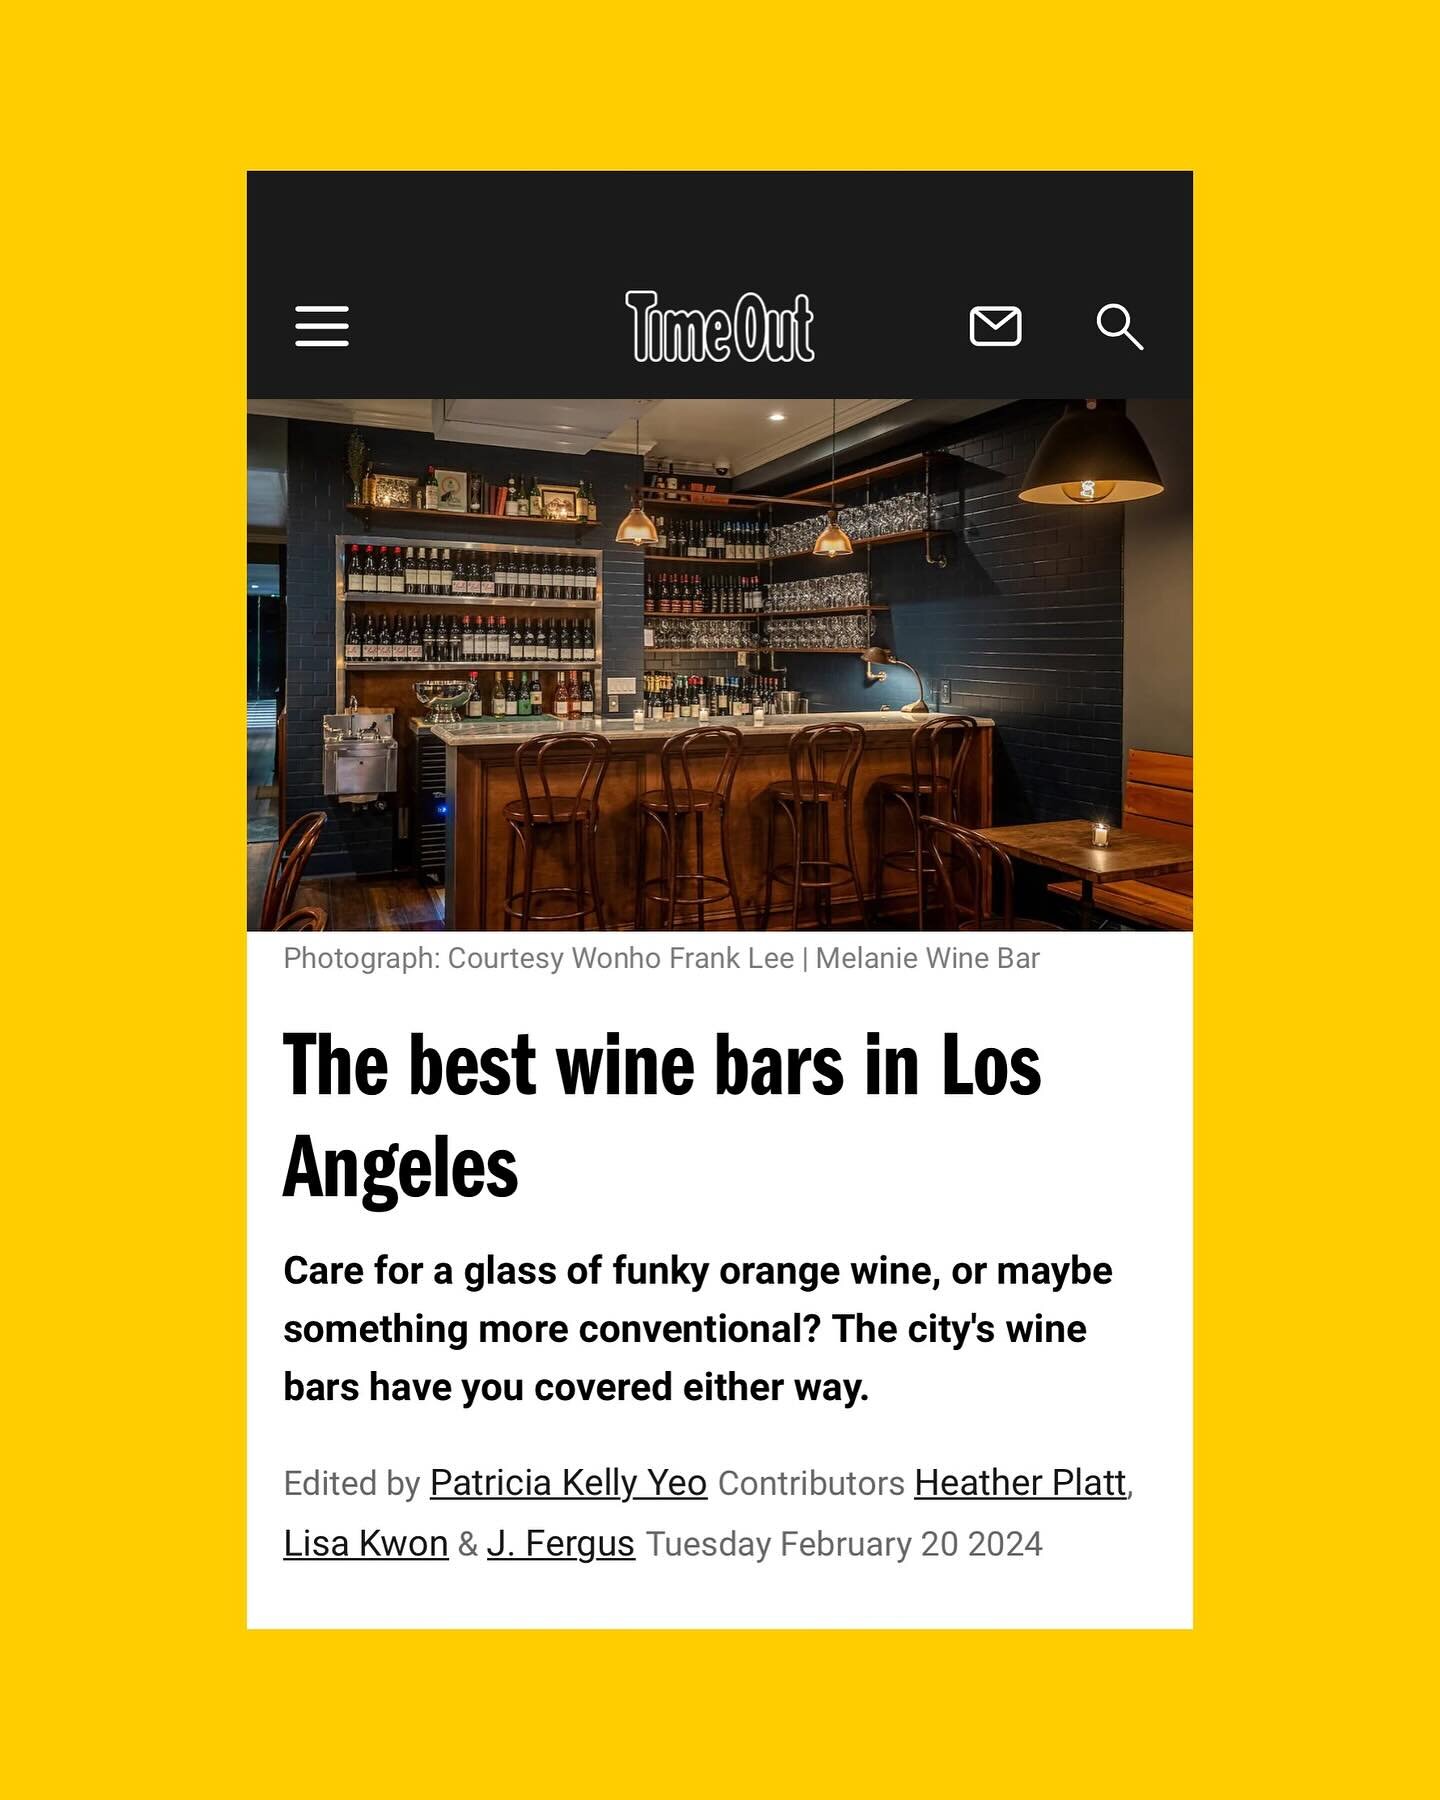 Yahoo! Thanks @timeoutla . We love our Los Angeles community and we do everything we can to bring y&rsquo;all the best wine offerings, hospitality, and events we can. Humbled to be featured among greats! #tabularasabar #timeoutla #timeout #bestwineba